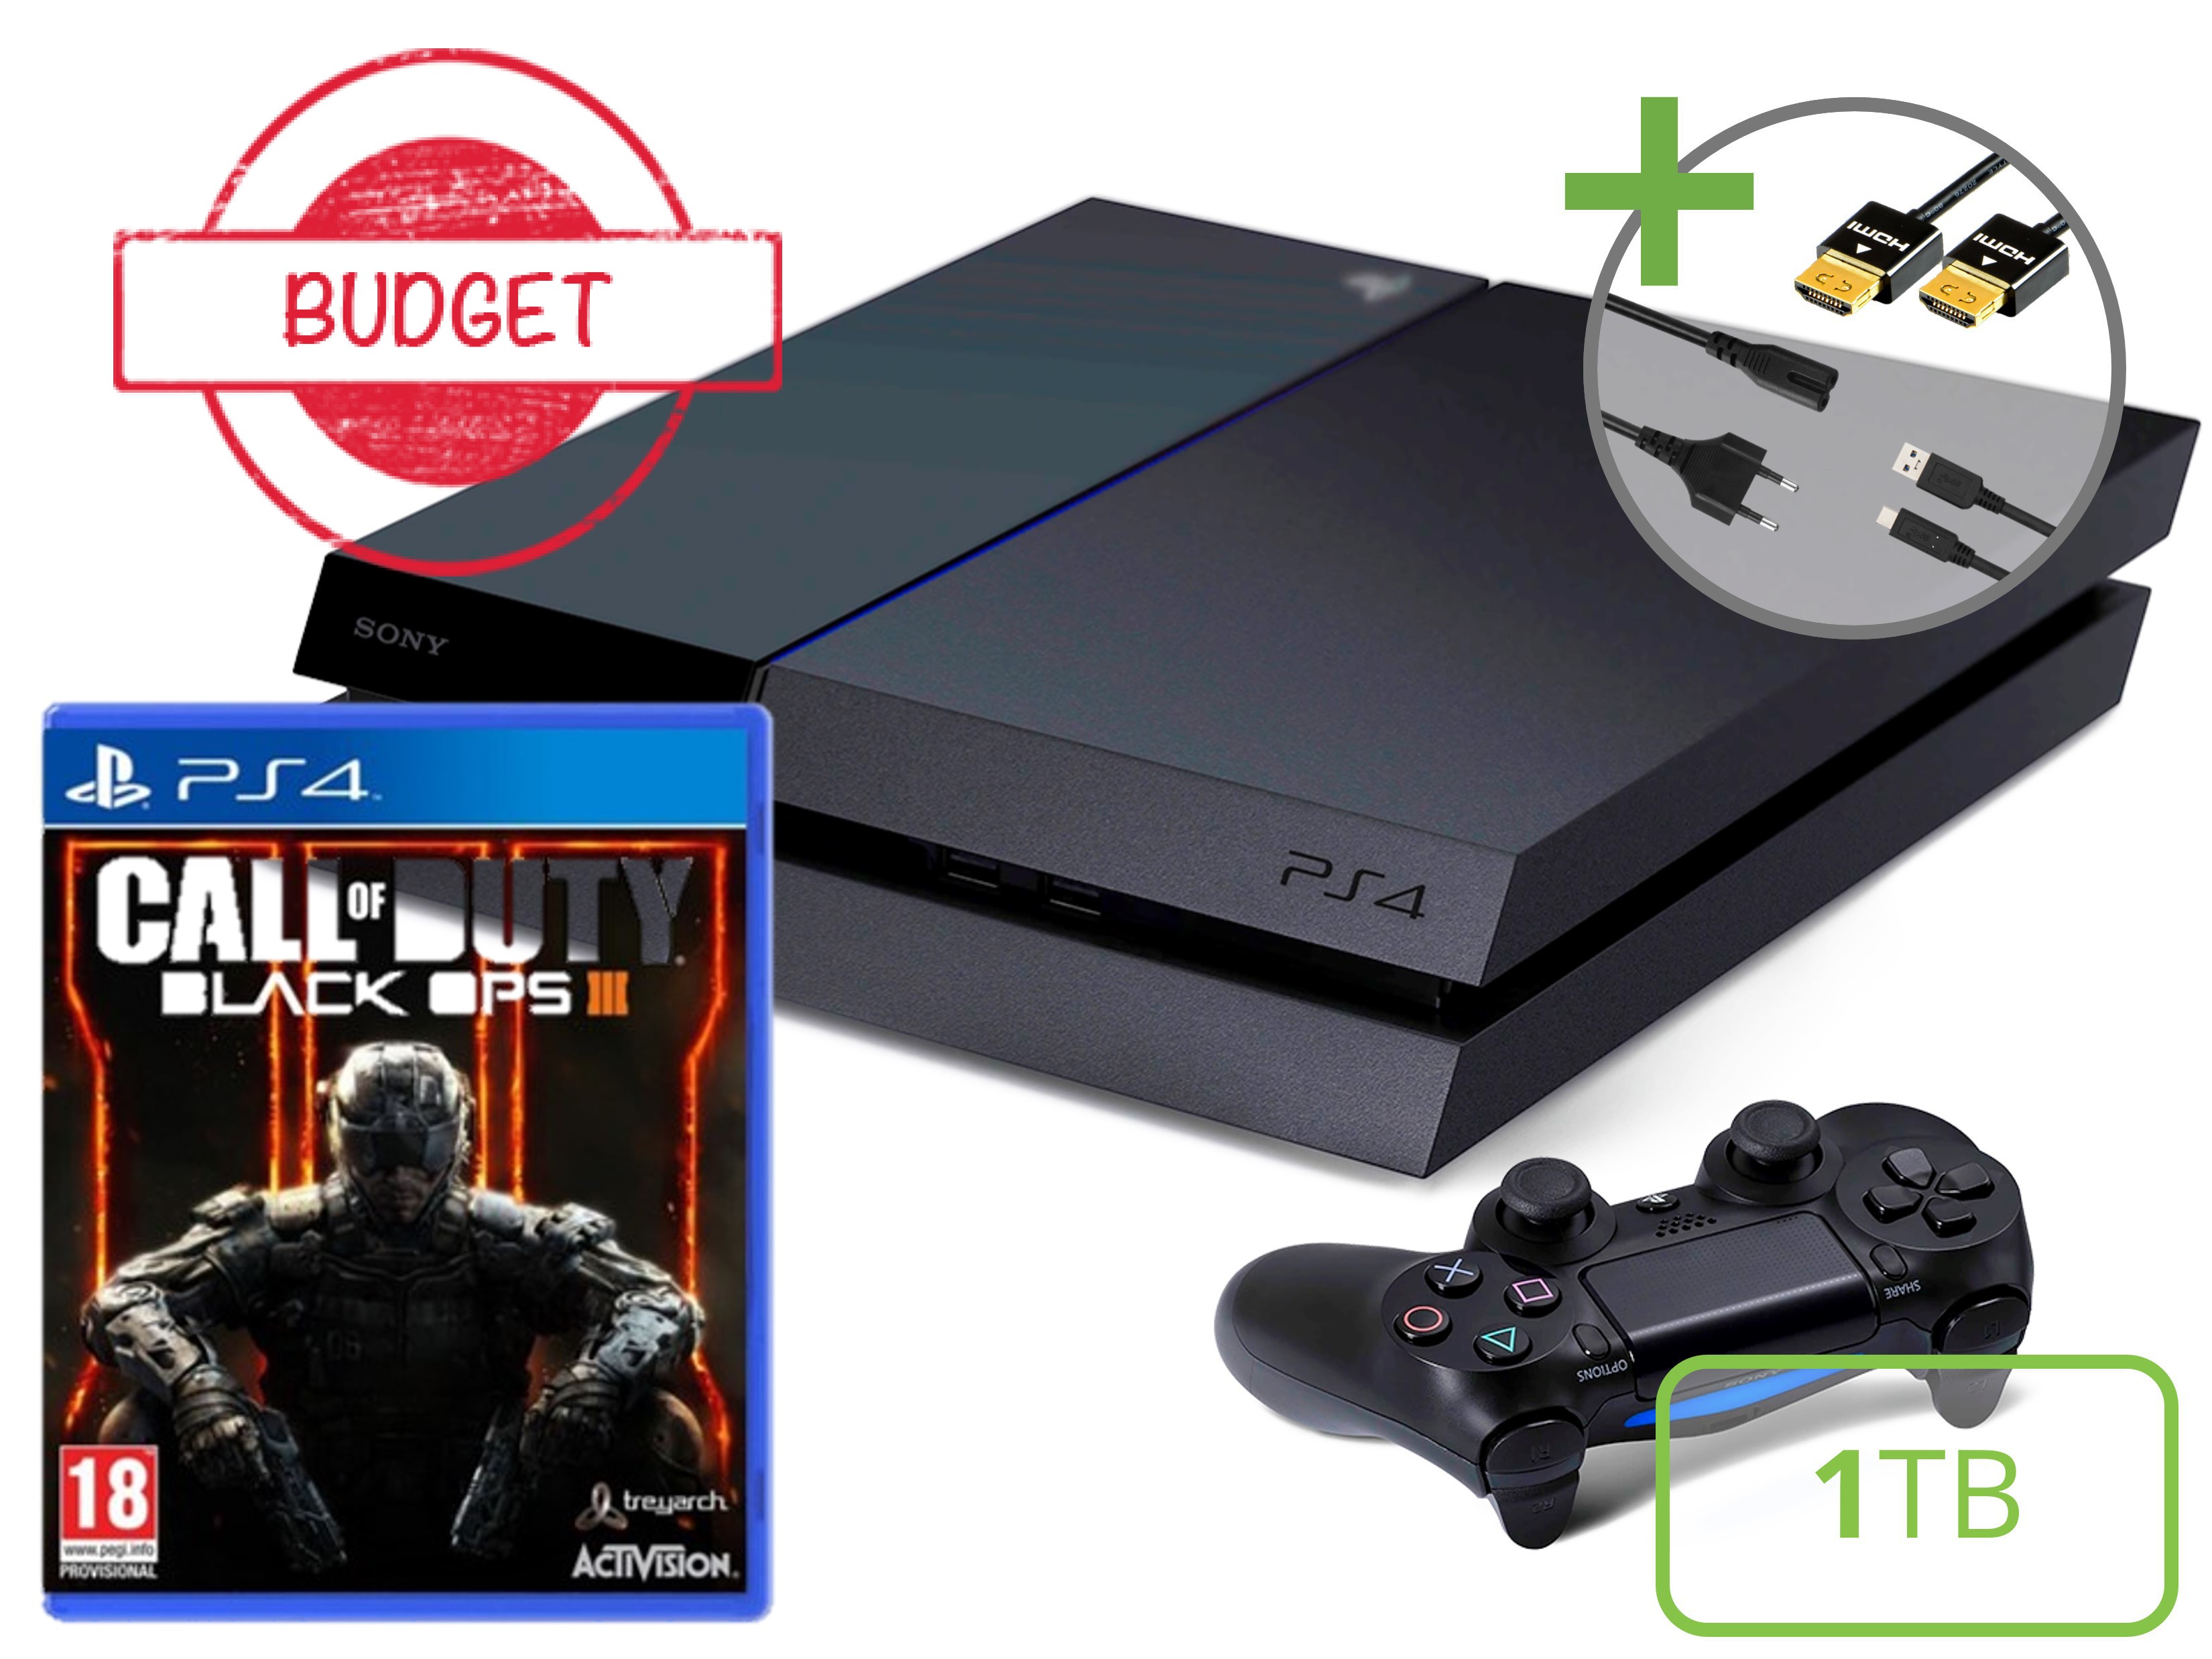 Sony PlayStation 4 Starter Pack - 1TB Call of Duty Black Ops III Edition - Budget Kopen | Playstation 4 Hardware